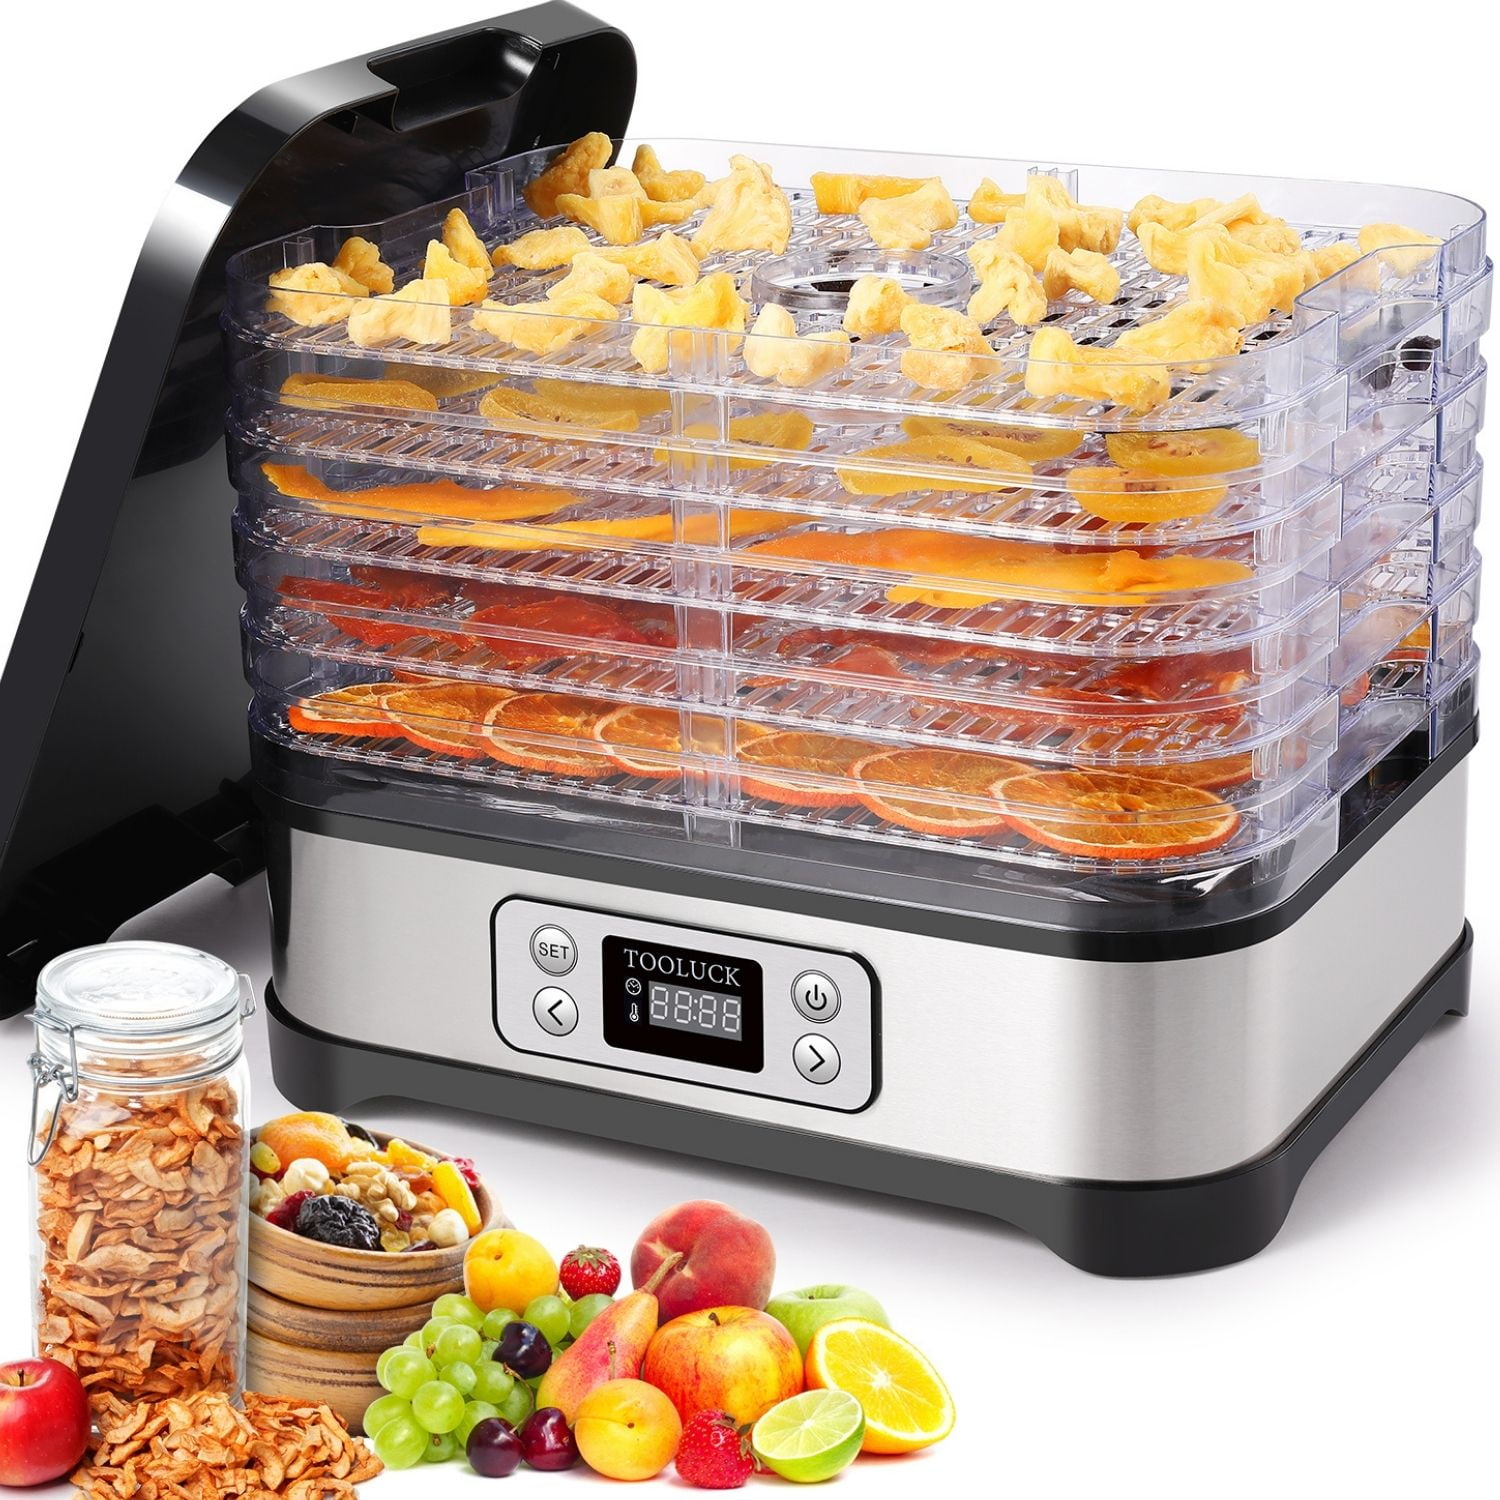 Professional Food Dehydrator Machine, Jerky Dehydrator with Timer, Five Tray and LCD Display Screen, Electric Multi-Tier Food Preserver for or Fruit Vegetable Dryer -